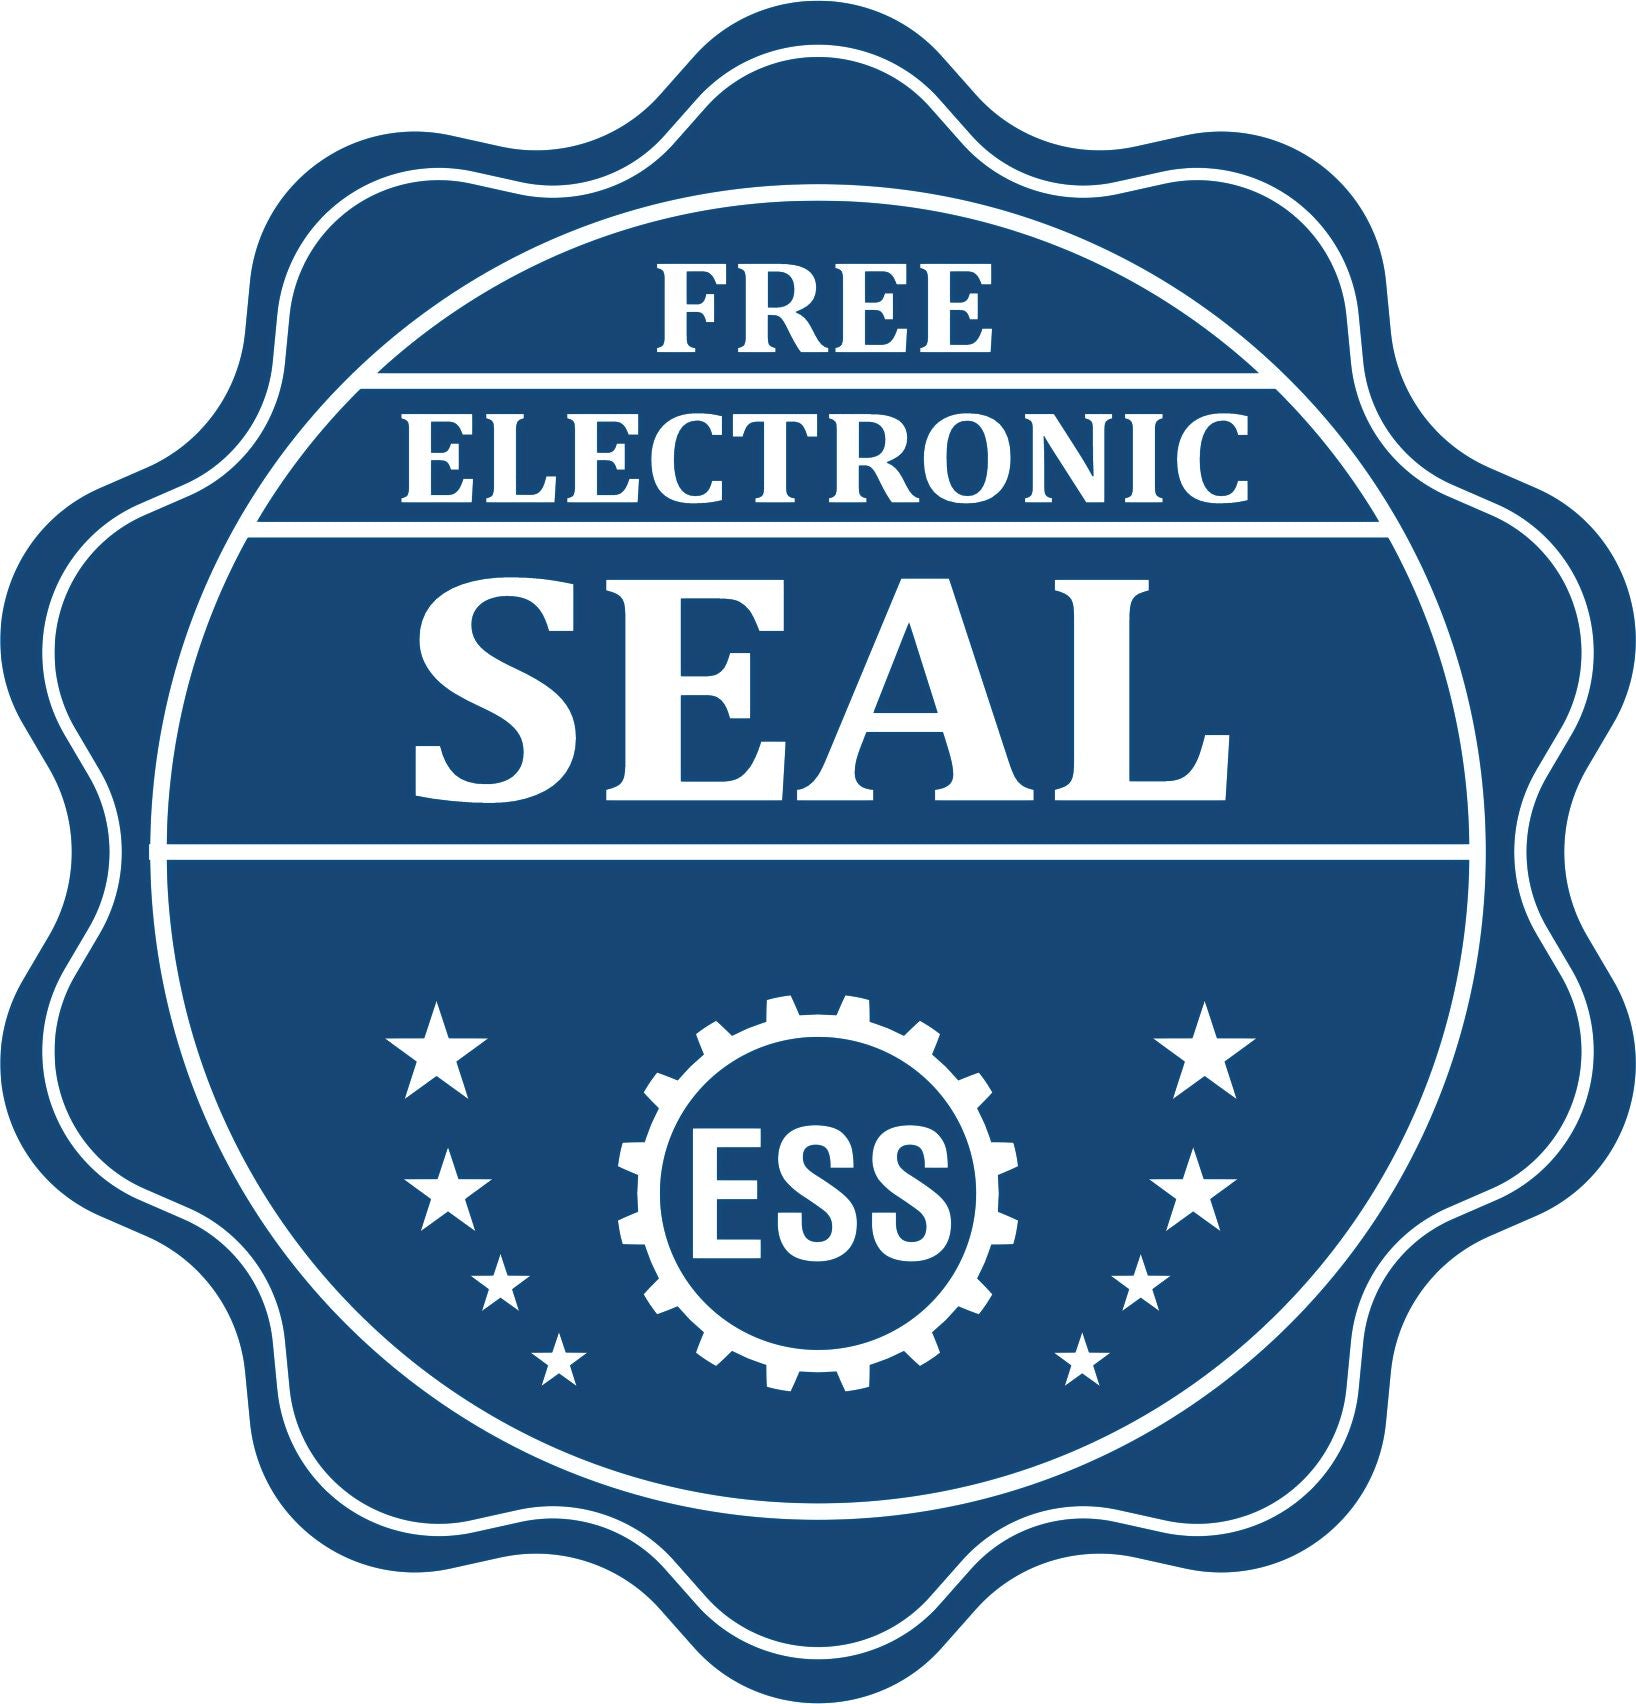 A badge showing a free electronic seal for the Super Slim Rhode Island Notary Public Stamp with stars and the ESS gear on the emblem.